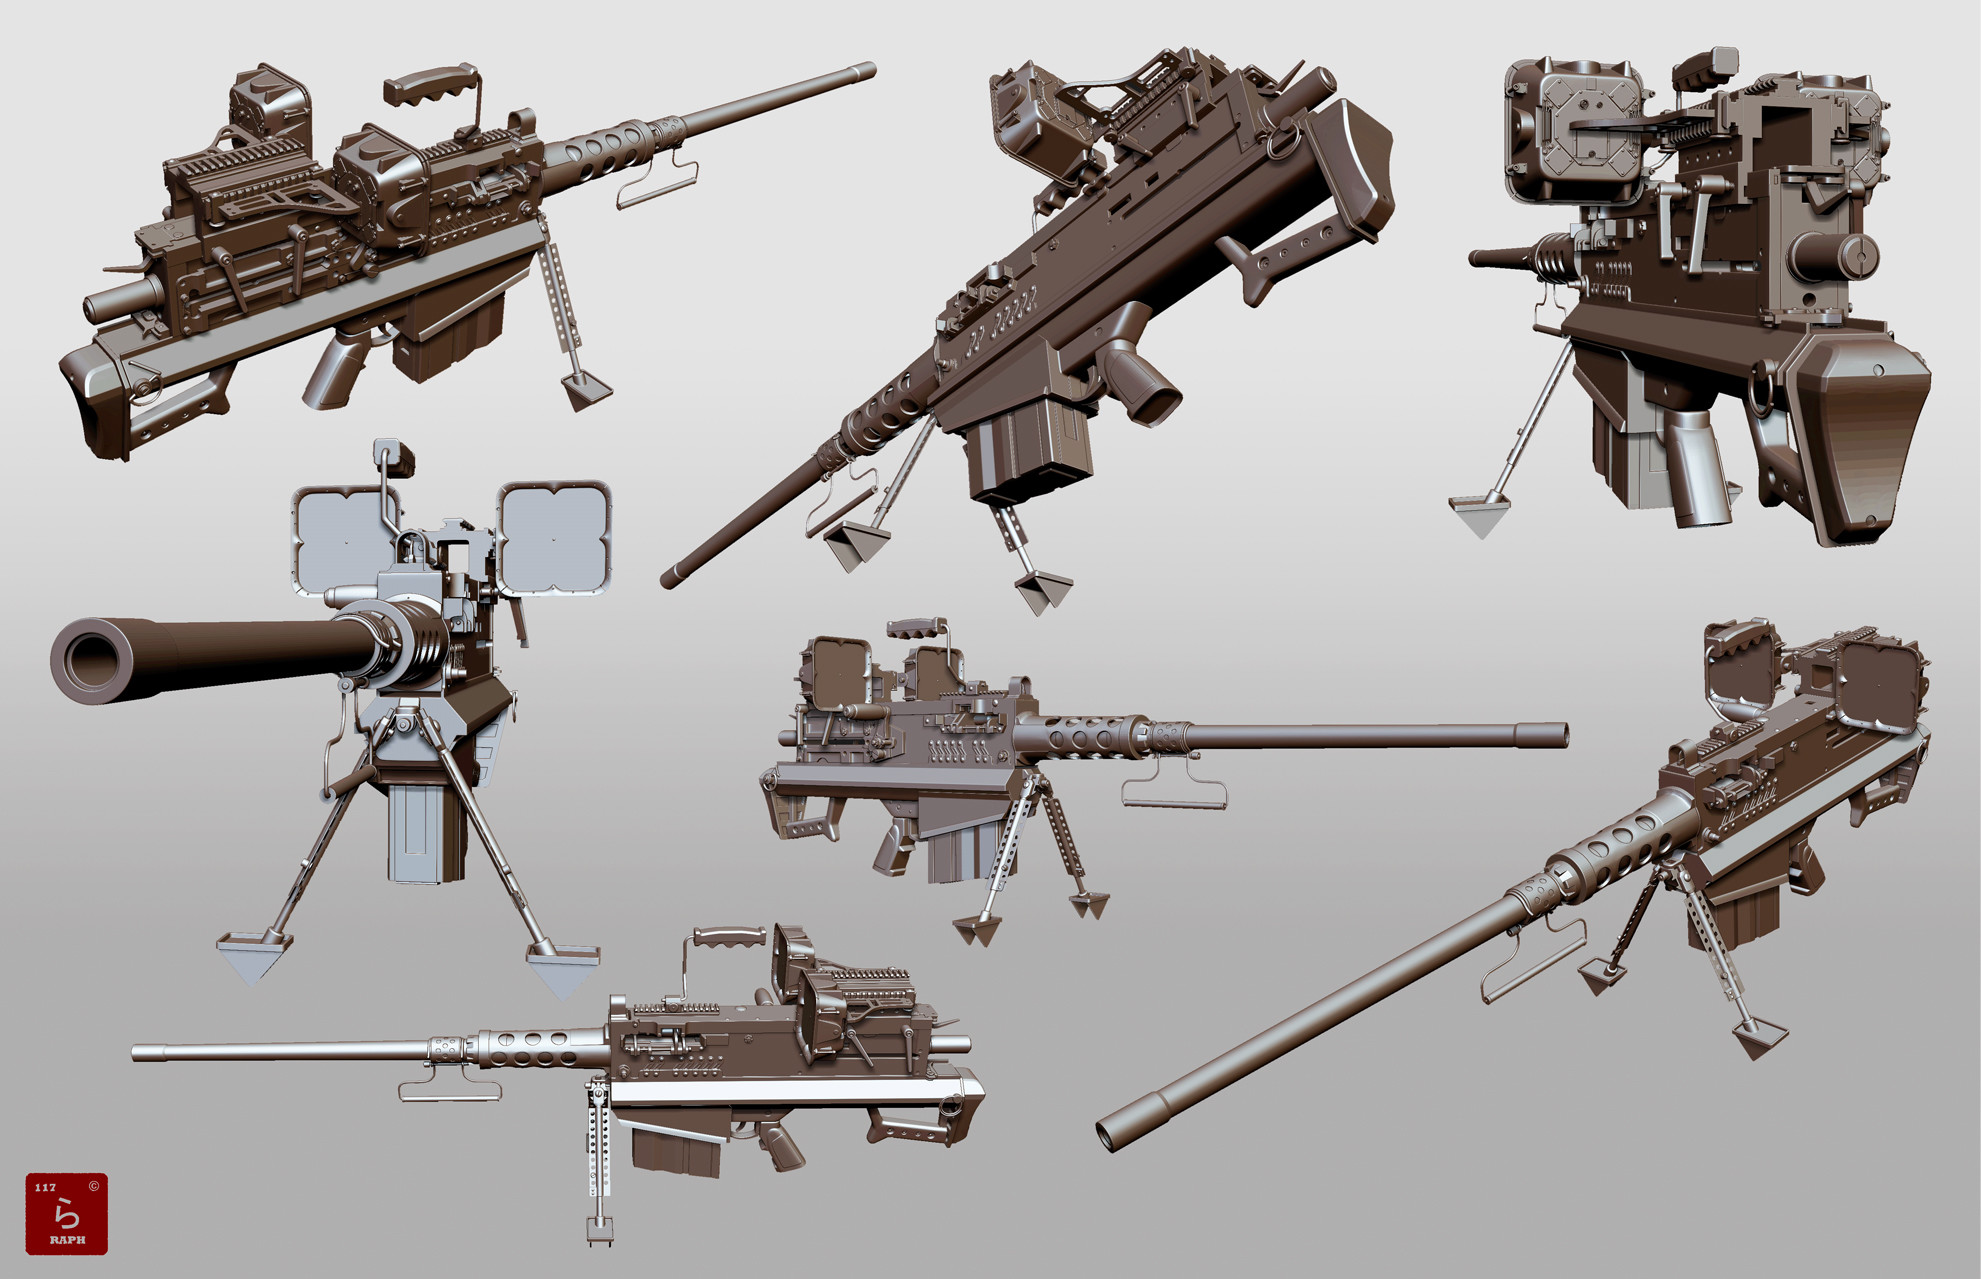 1981x1279 RayMackenzie 11 4 Combined 50 cal machine gun and sniper rifle by Je-huty